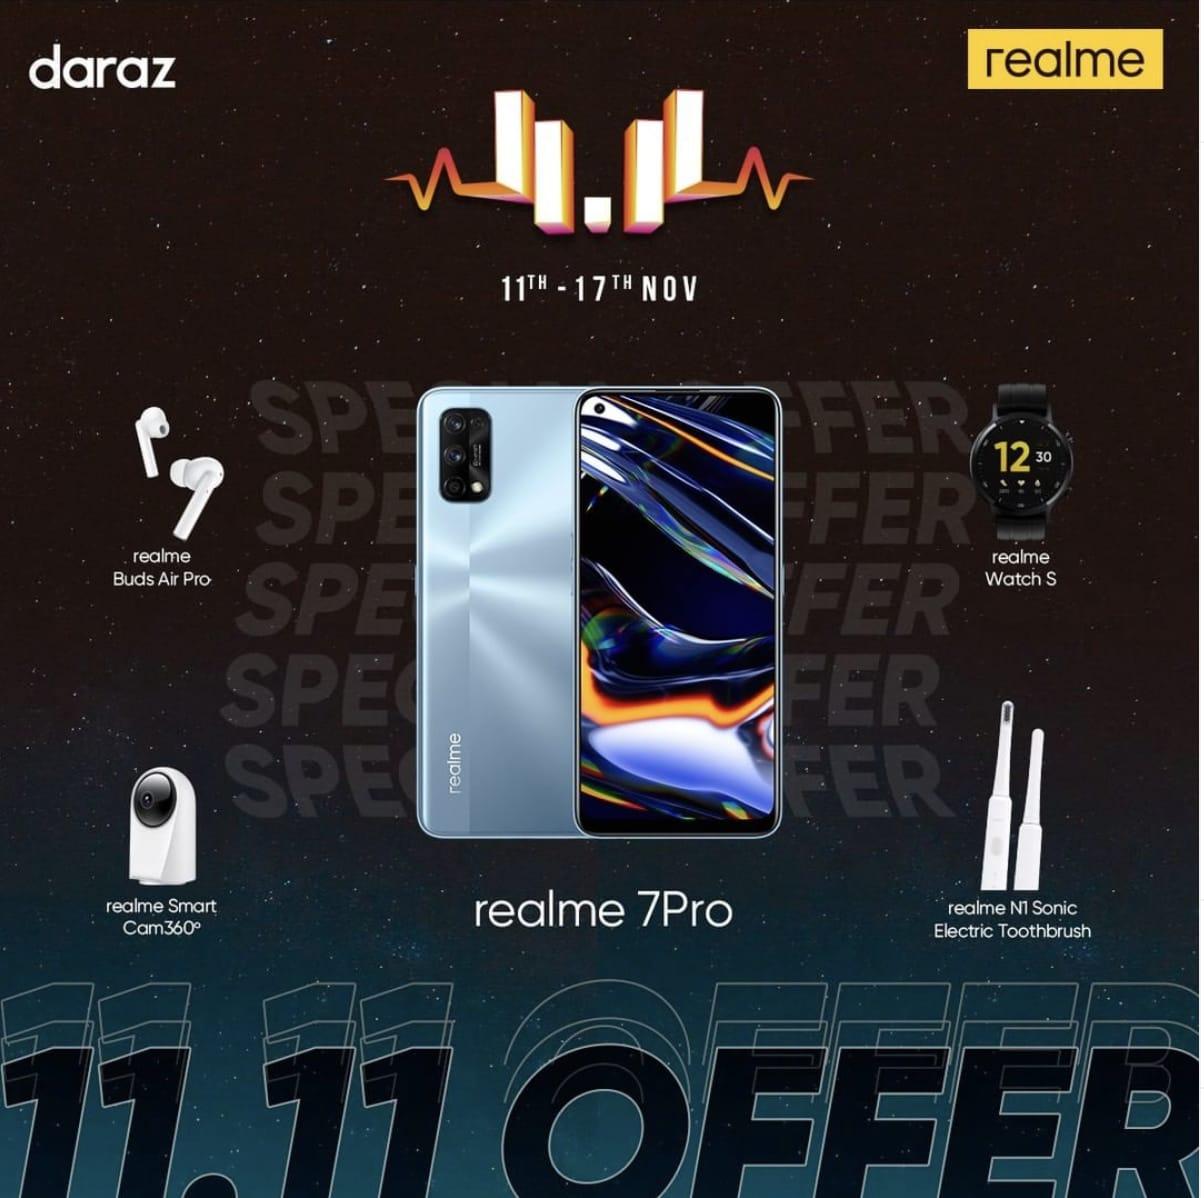 realme Pakistan ranked the Top 1 smartphone brand (GMV) in mobile & tablets category for Daraz 11 11 Sale